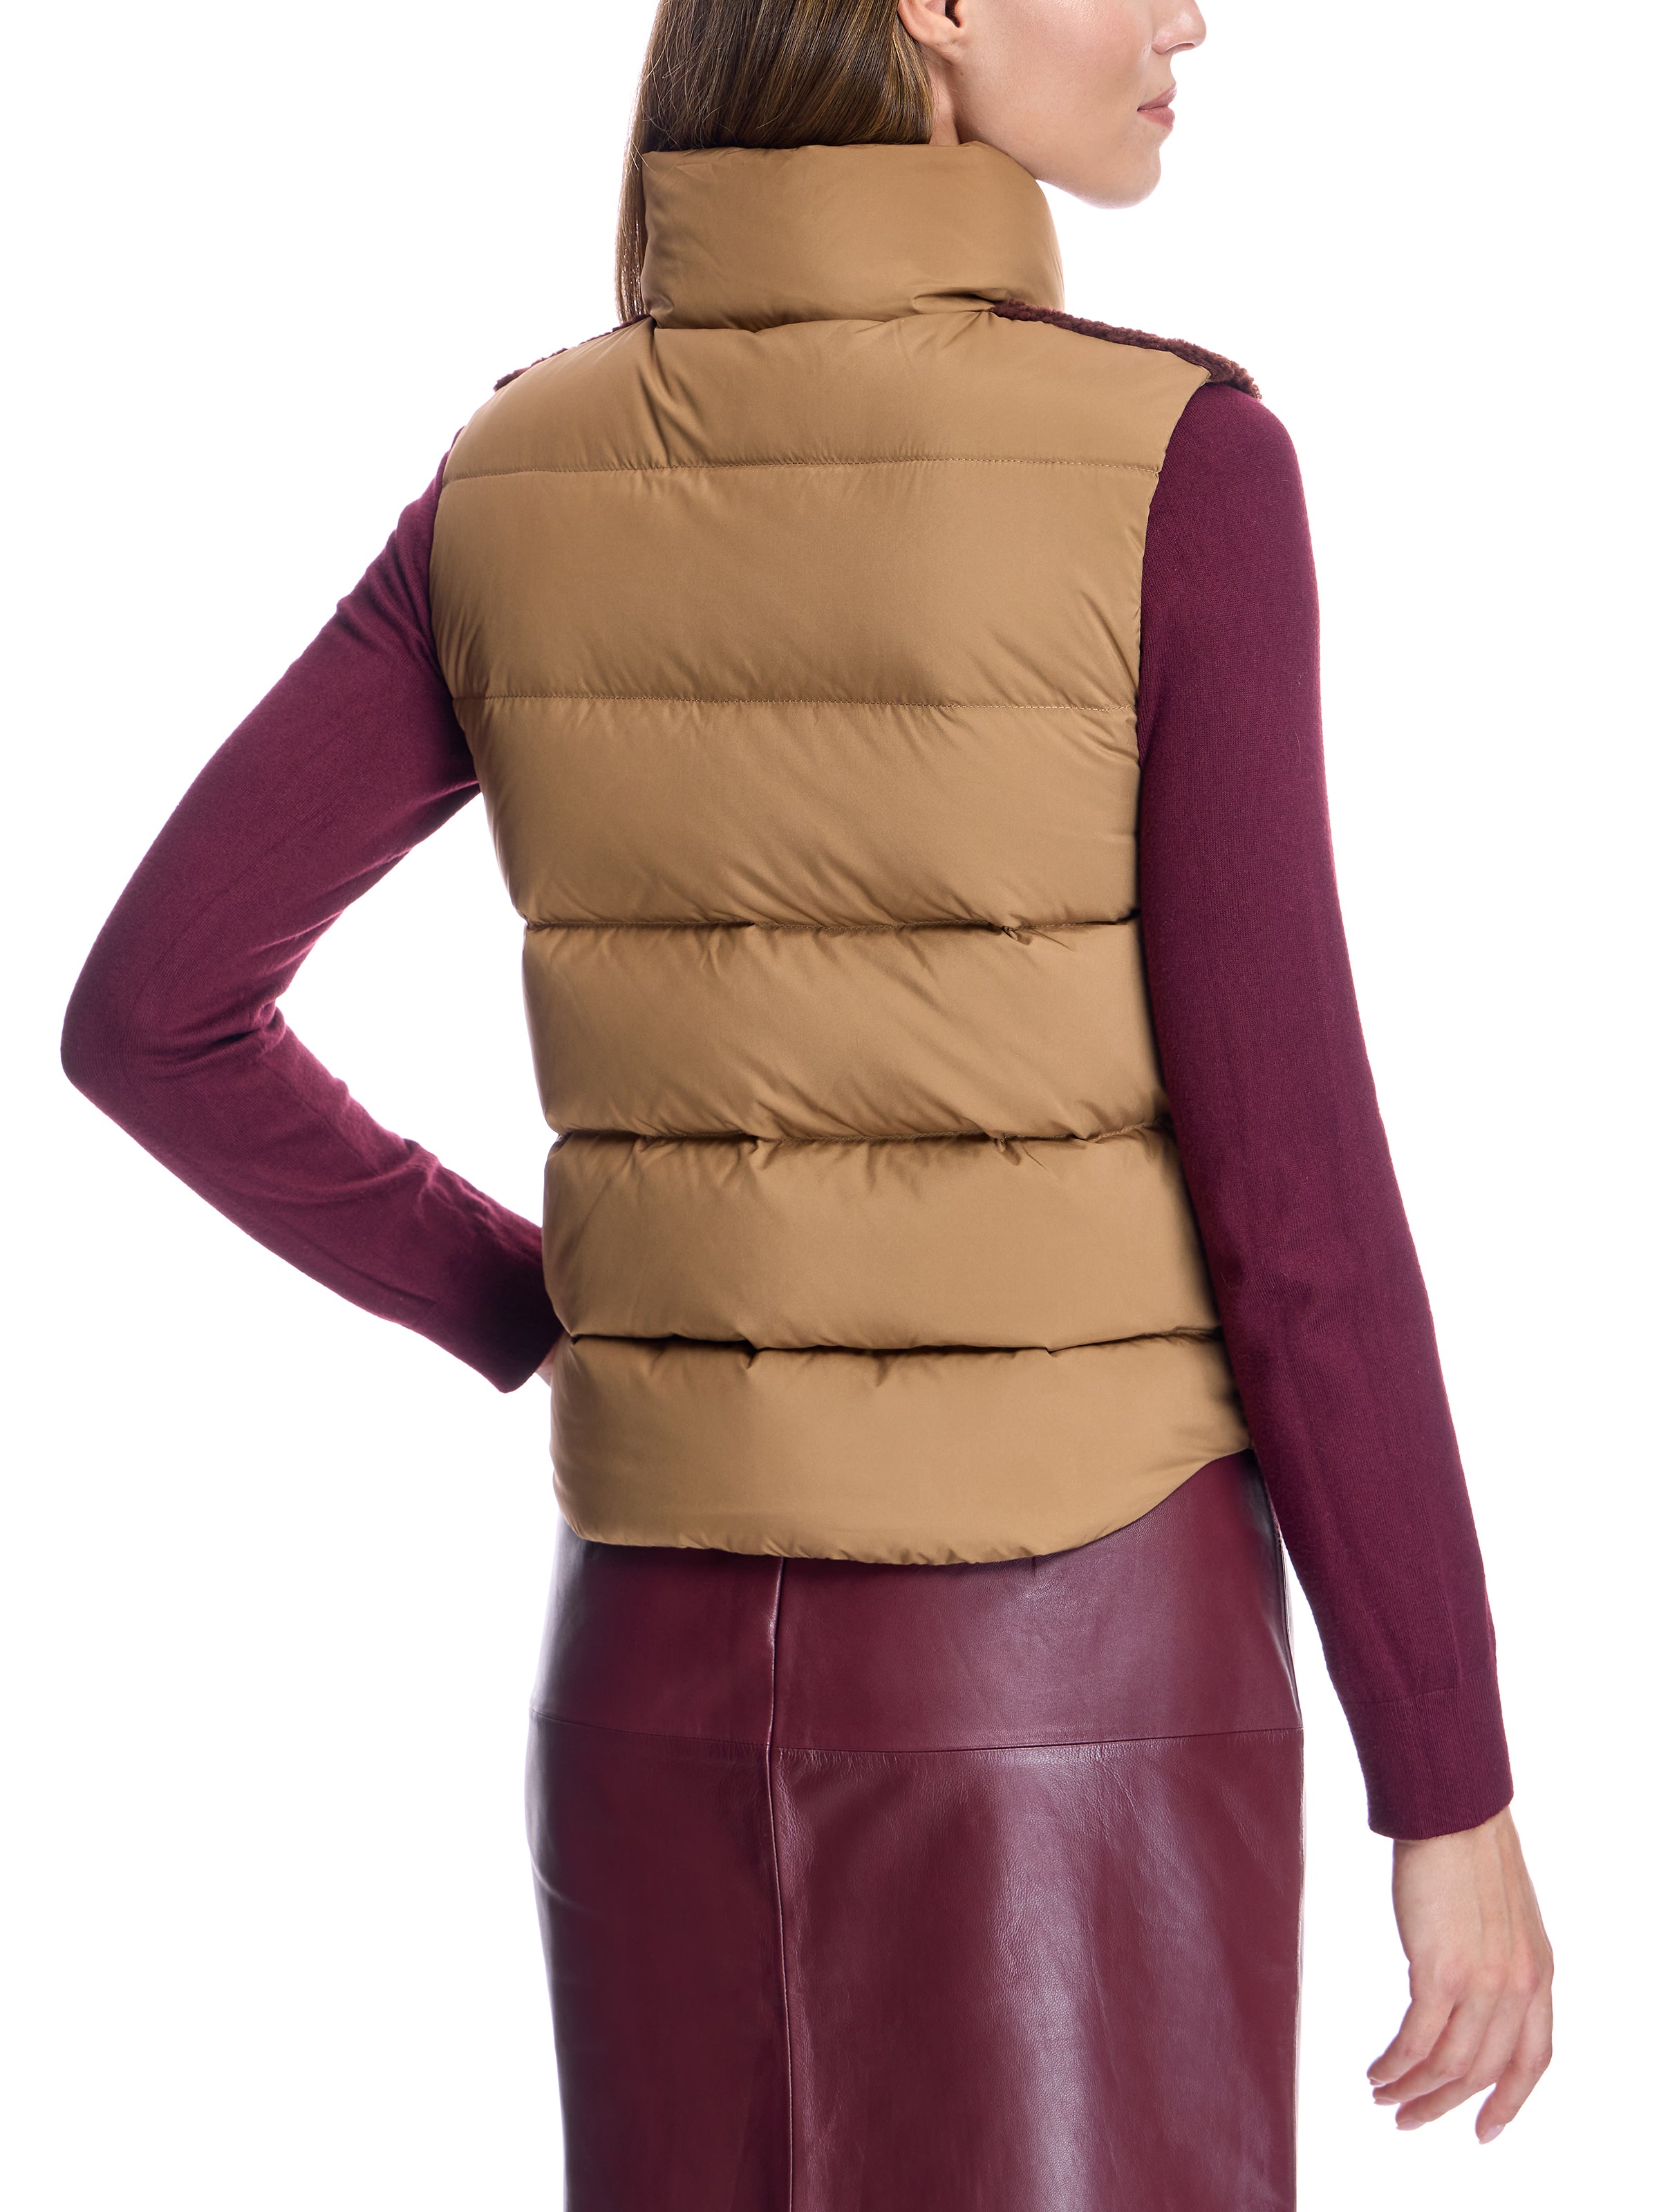 Shearling Lamb Vest with Nylon Puffer Back